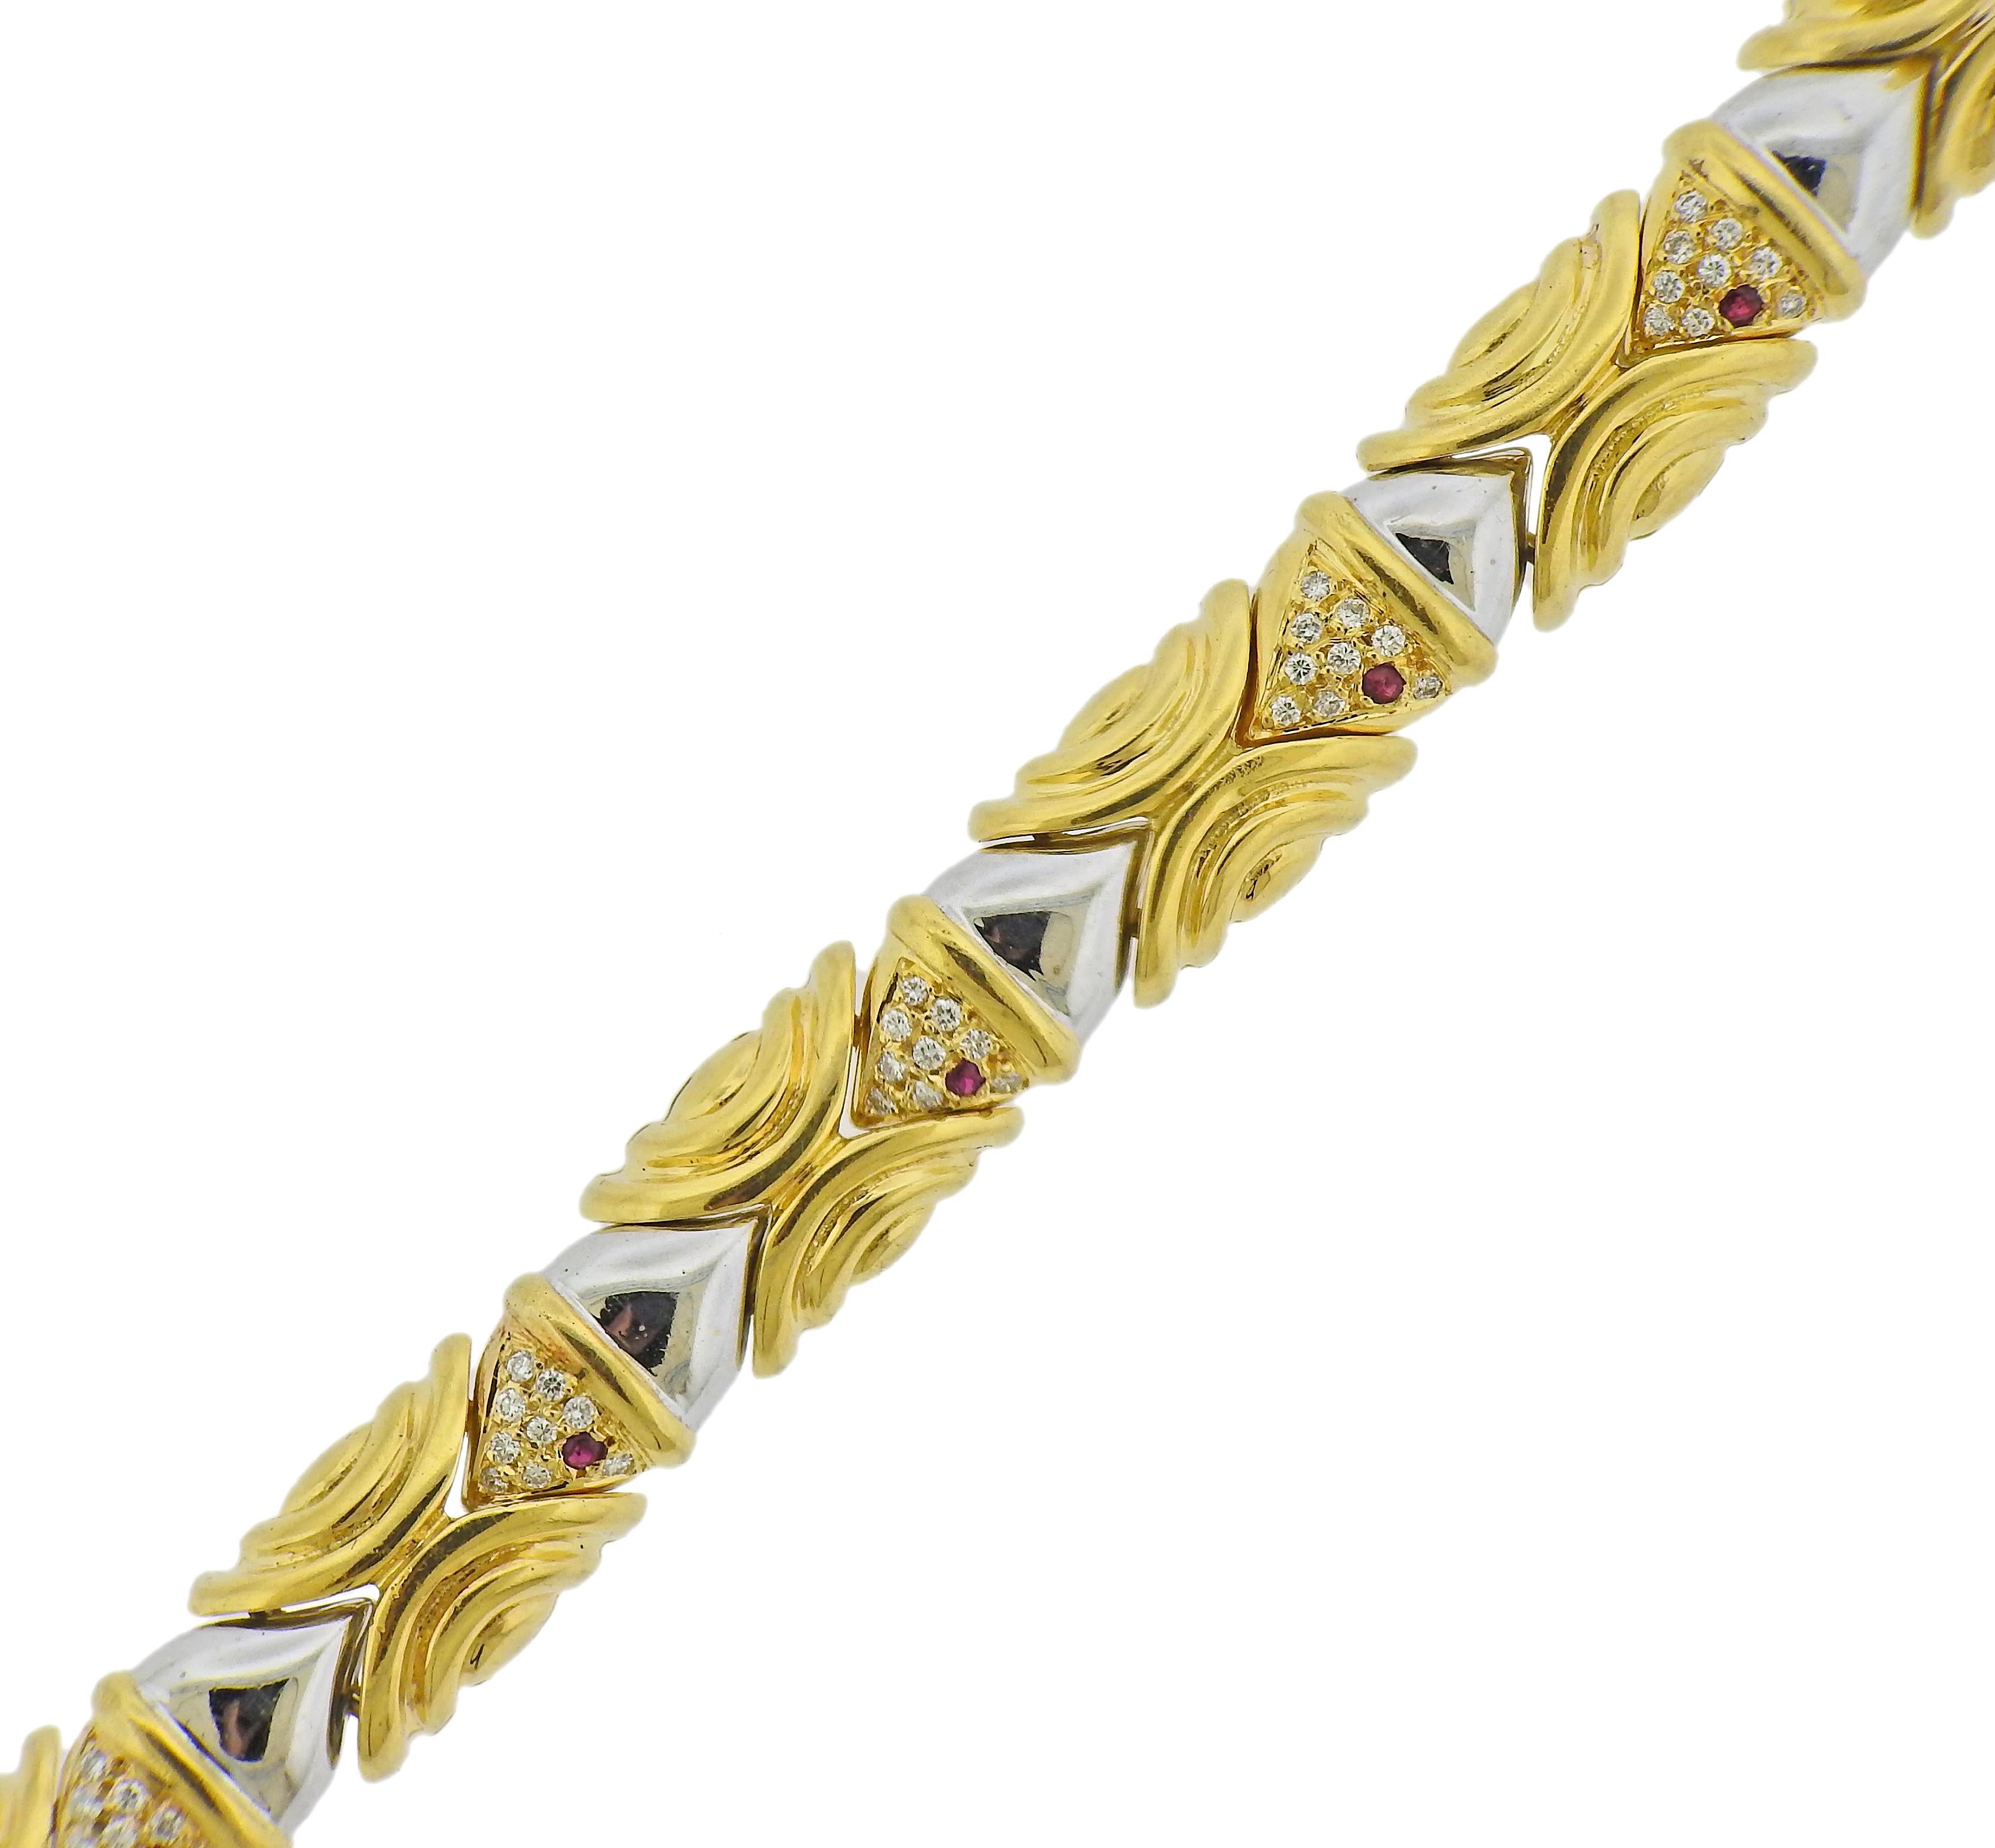 18k white and yellow gold fish motif bracelet, set with approx. 0.72ctw in diamonds and ruby eyes. Bracelet is 7 1/16